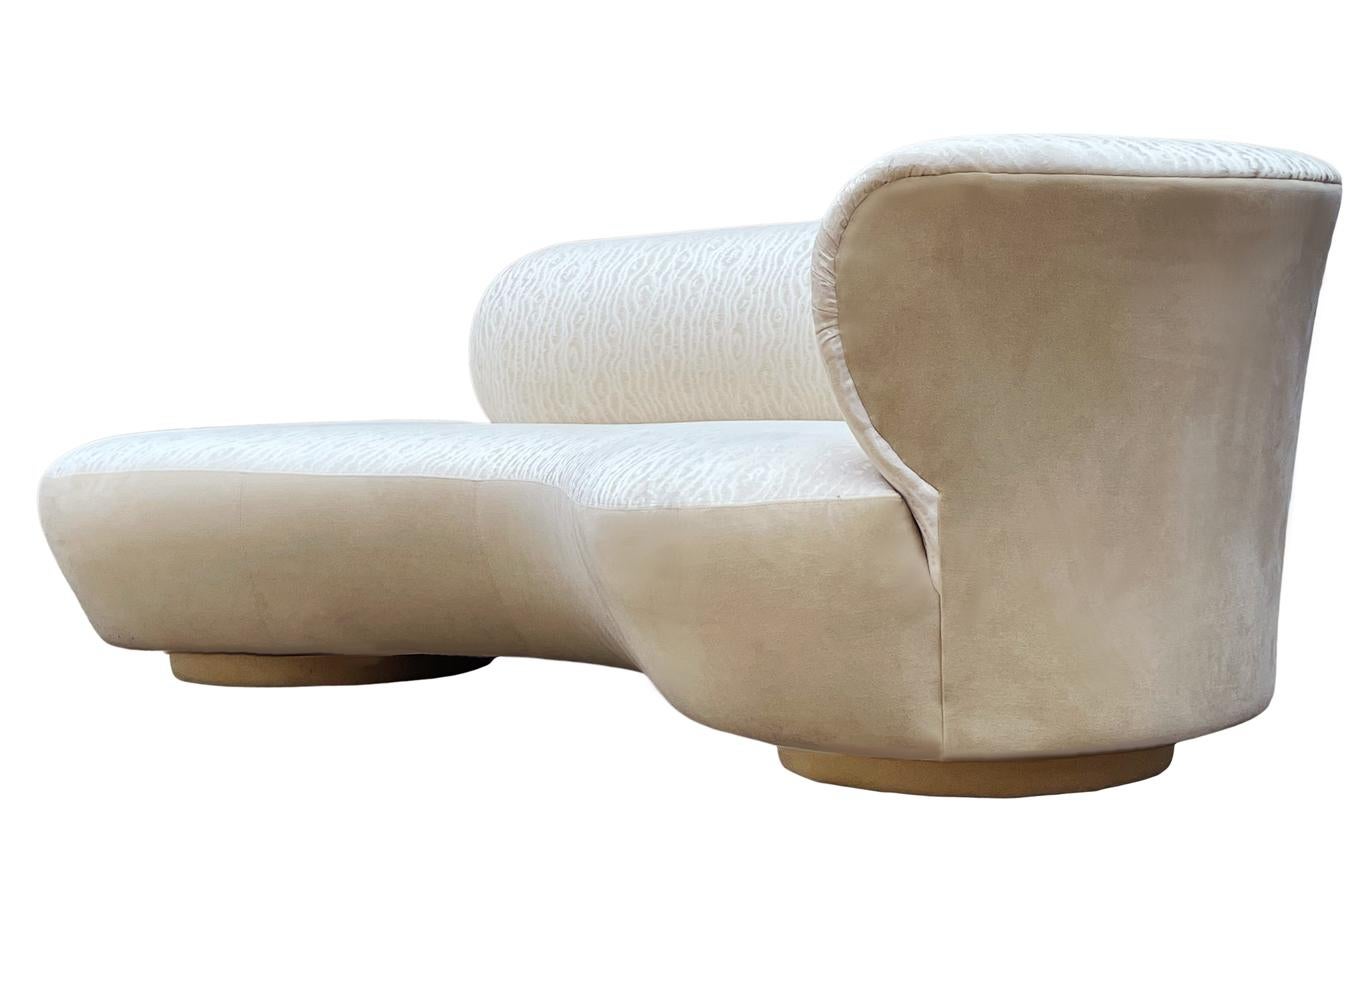 American Mid Century Modern Curved Sculptural Serpentine Cloud Sofa or Chaise Lounge For Sale